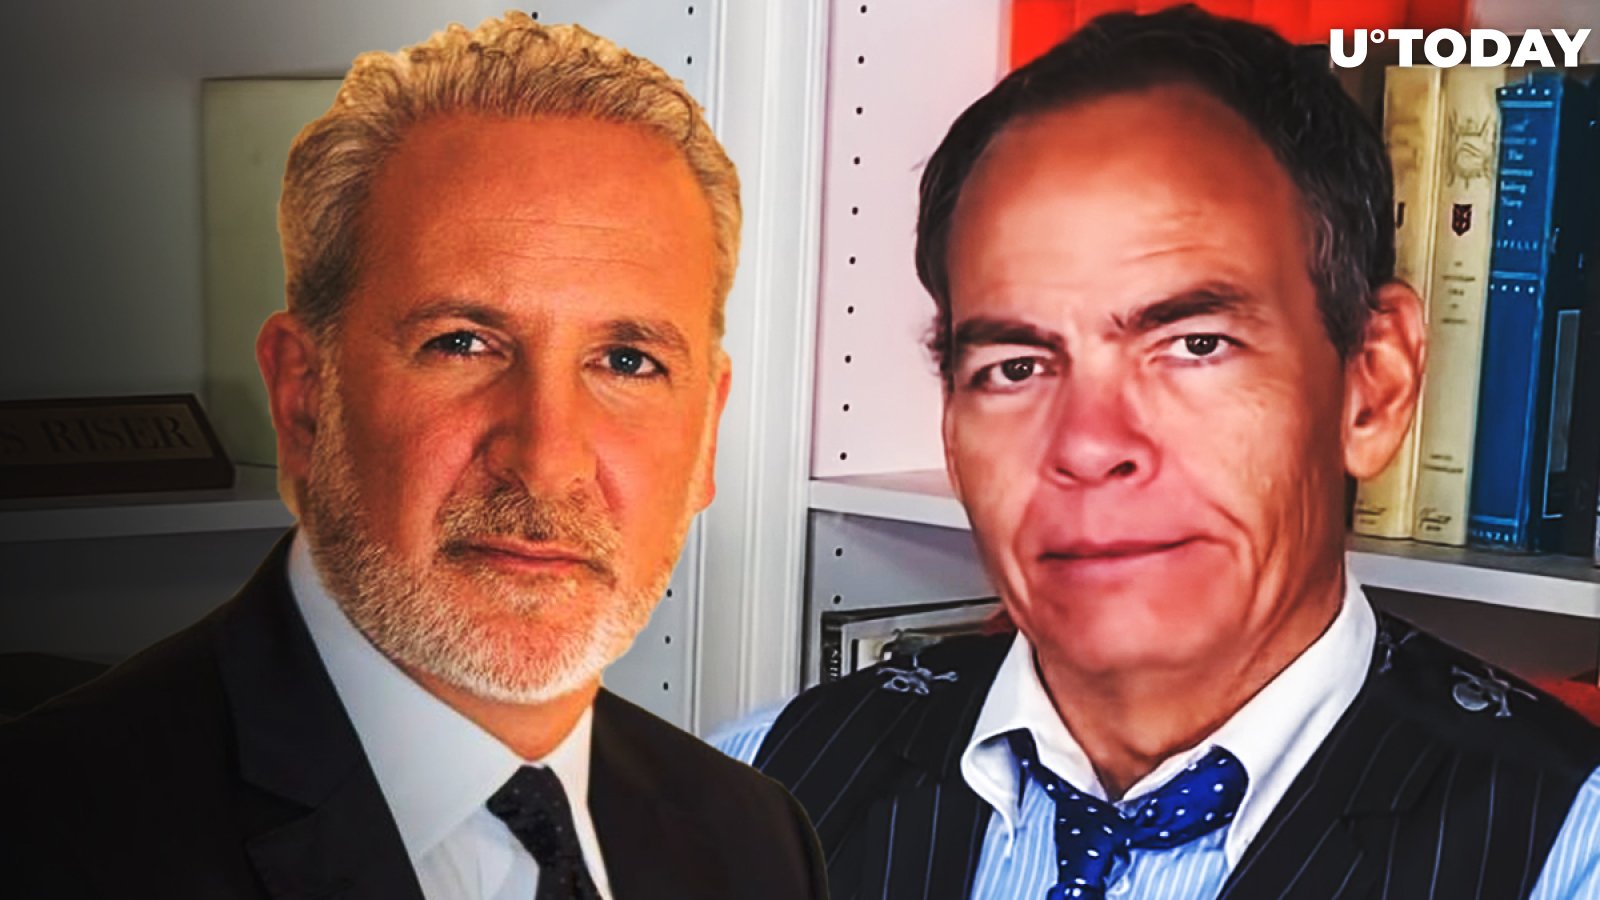 Peter Schiff Hires Himself Out for Bitcoin Debate With Pomp and Mark Yusko, Max Keiser Claims